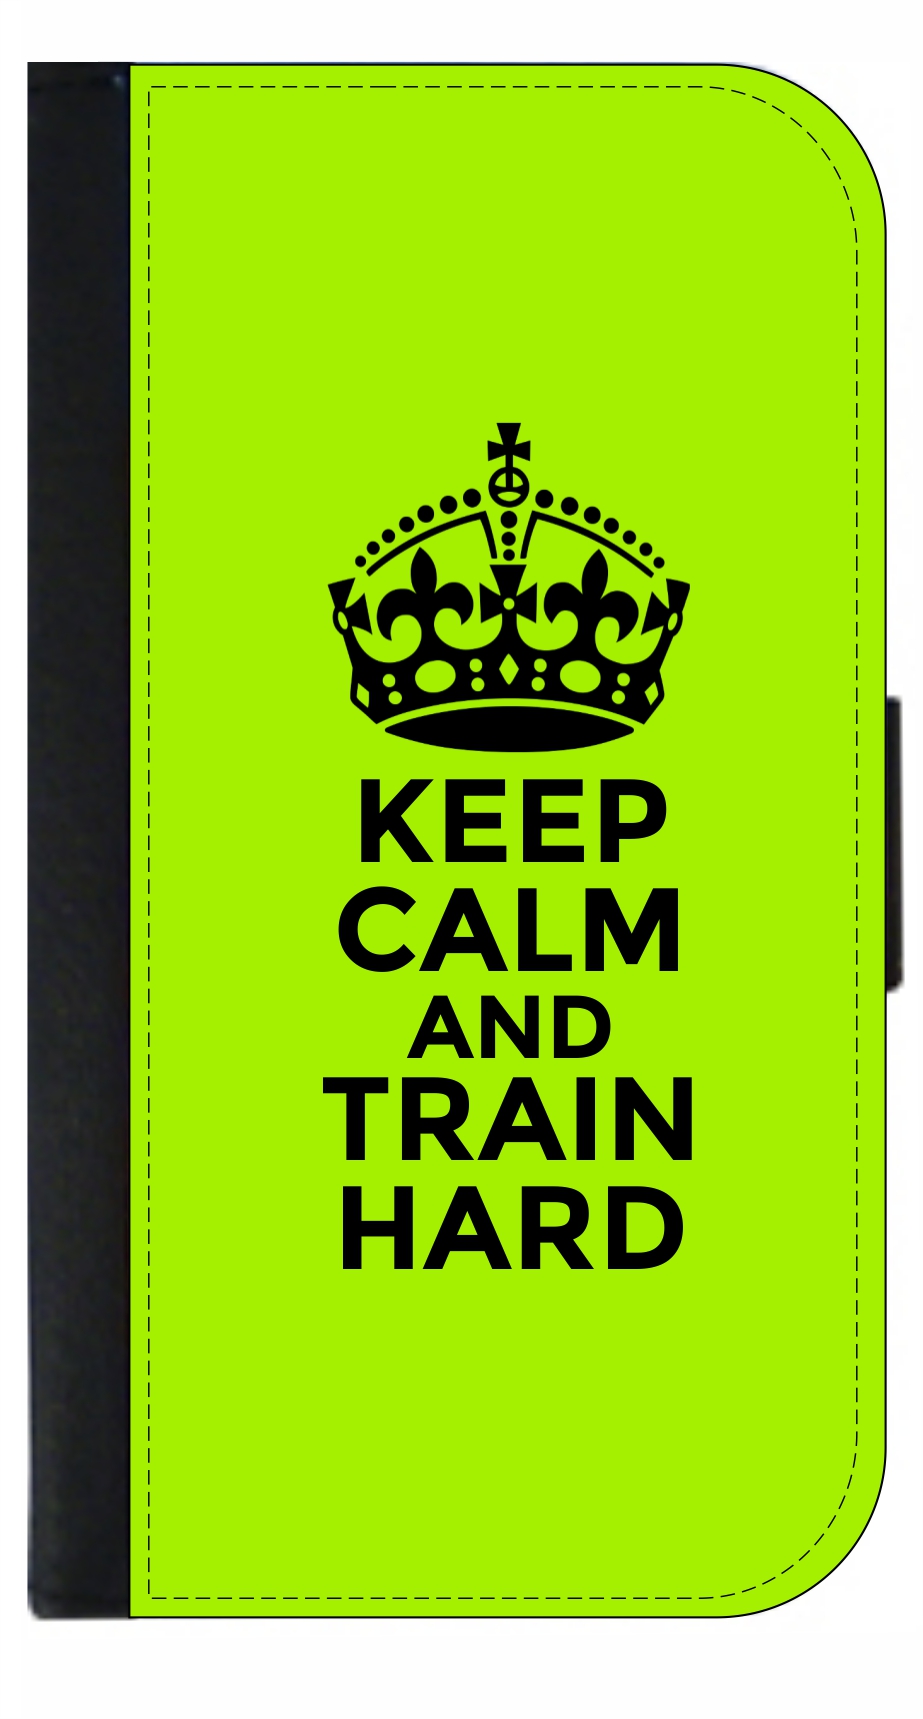 Keep Calm and Train Hard Quote Galaxy s10p Case - Galaxy s10 Plus Case - Galaxy s10 Plus Wallet Case - s10 Plus Case Wallet - Galaxy s10 Plus Case Wallet - s10 Plus Case Flip Cover - image 1 of 3